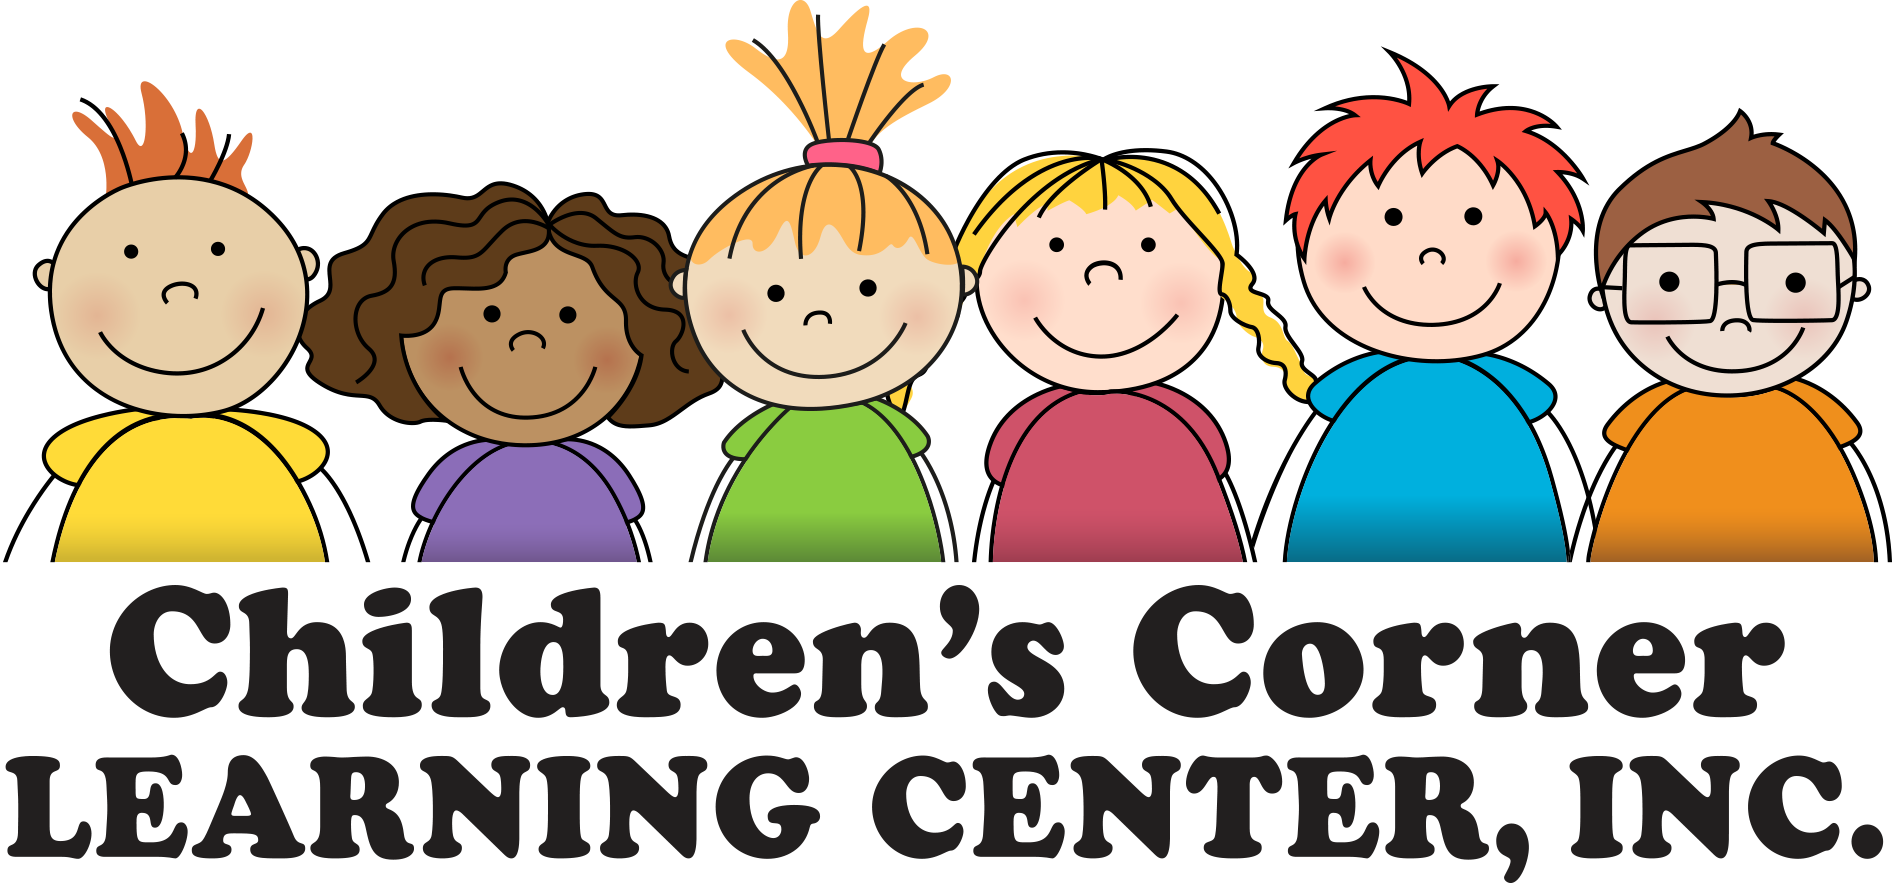 Centers clipart learning centers. Childrens corner center 